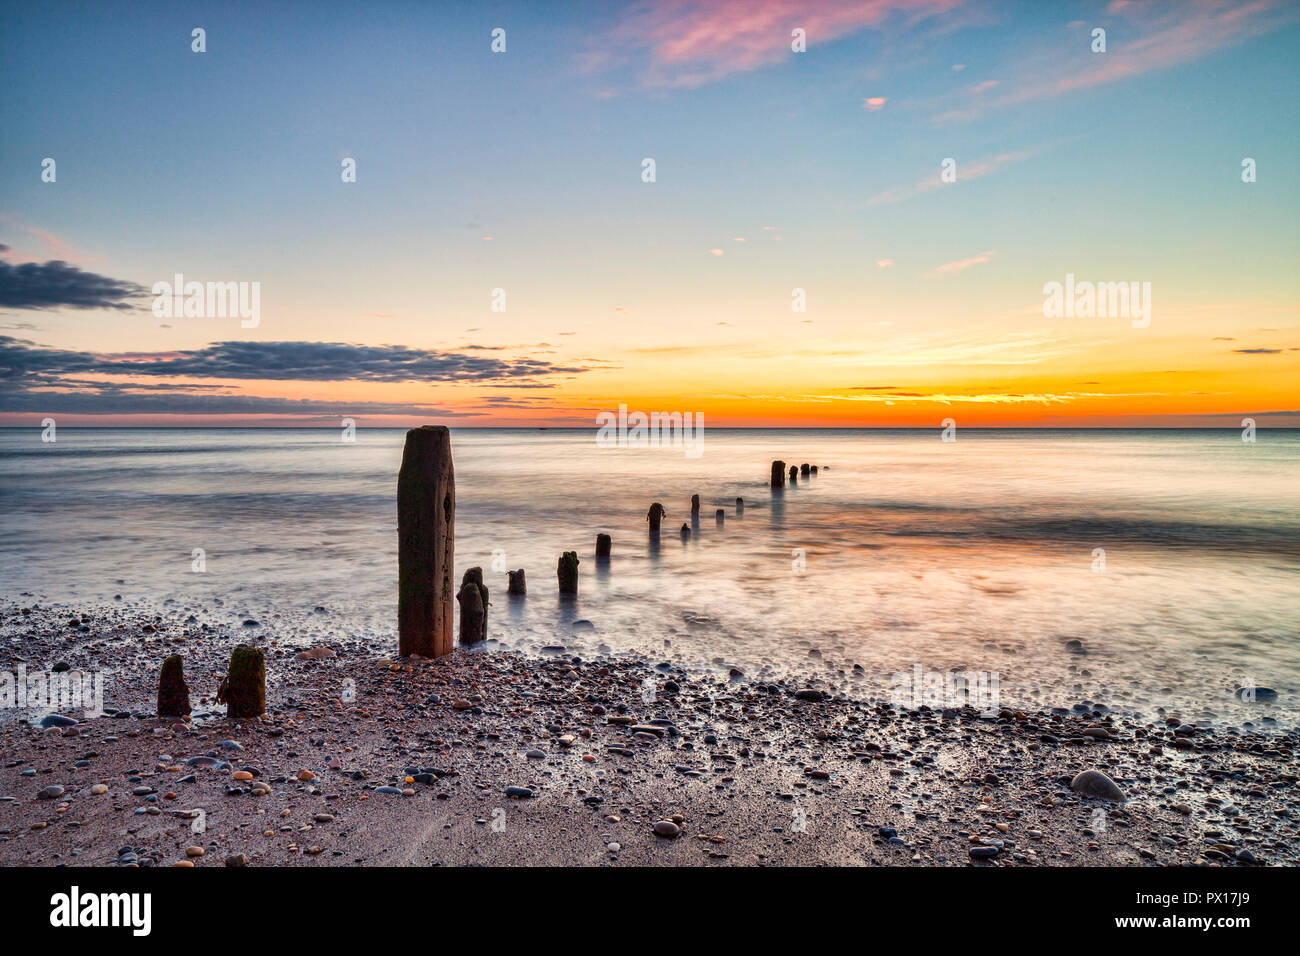 Remains of groynes on the beach at Sandsend, Whitby, North Yorkshire, at dawn Stock Photo